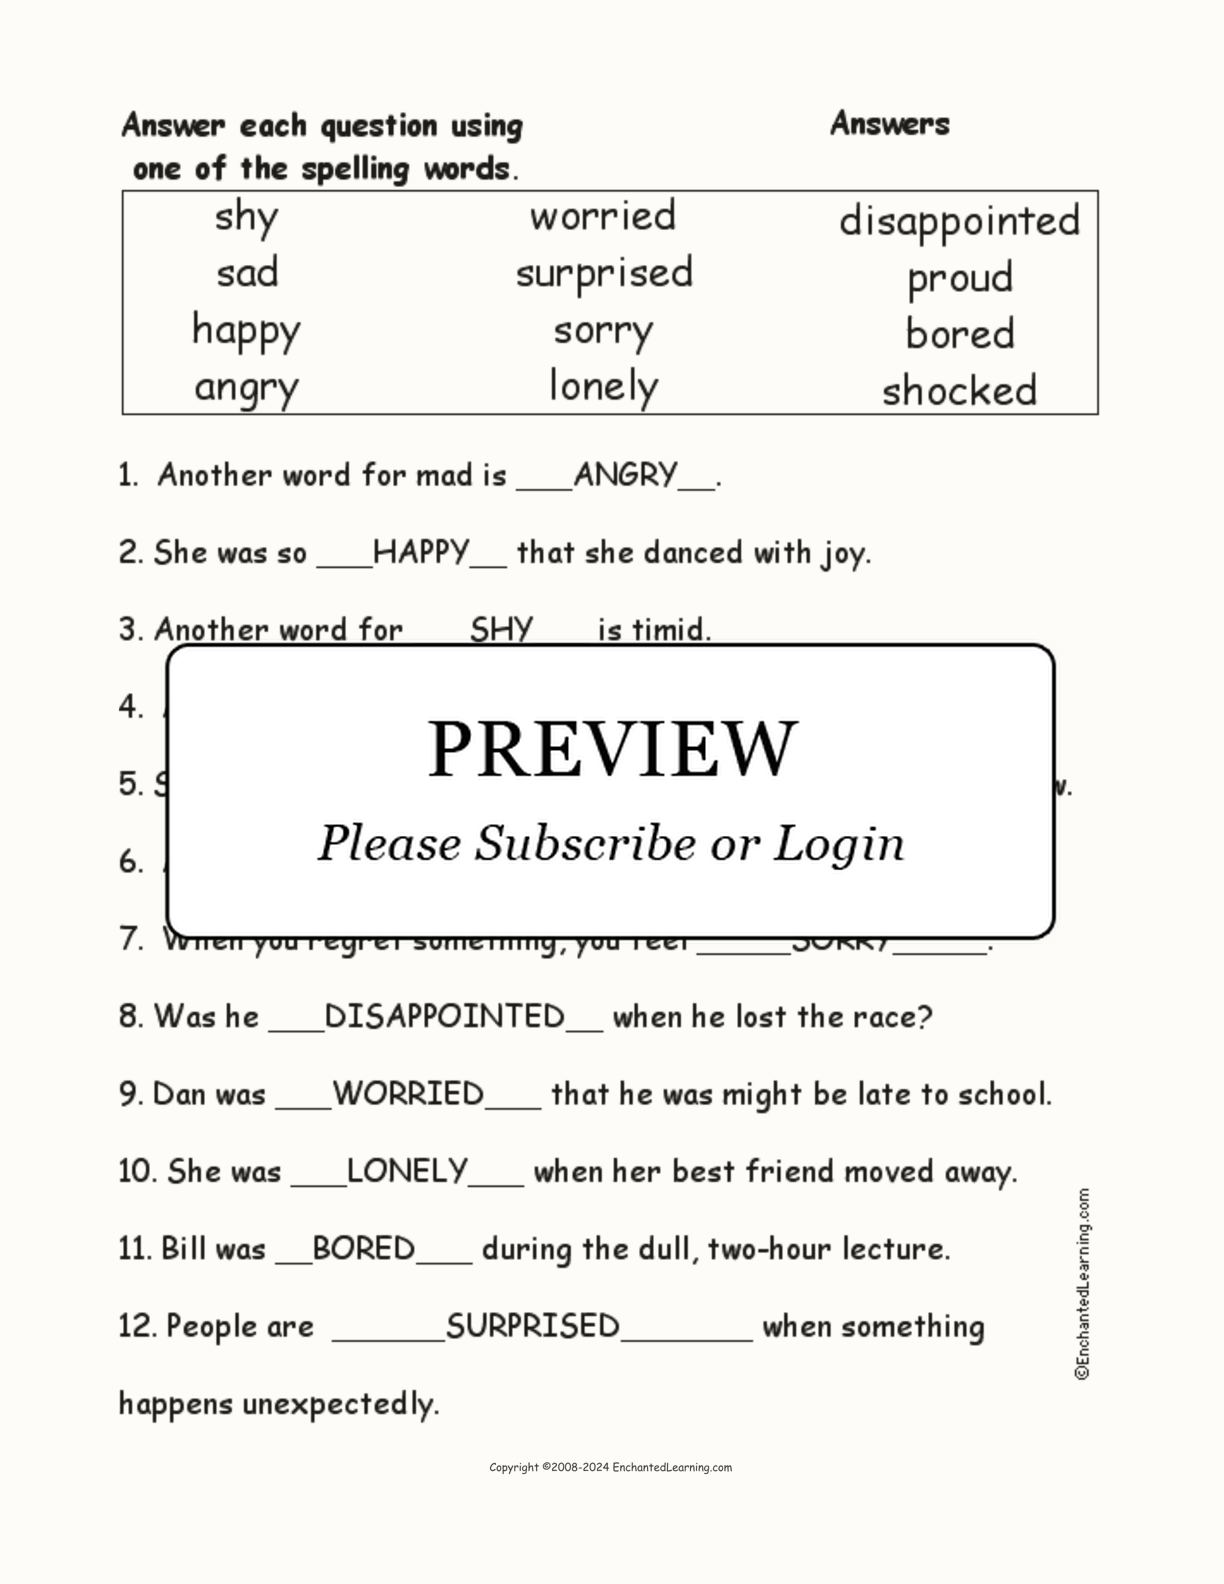 Emotion Spelling Word Questions interactive worksheet page 2